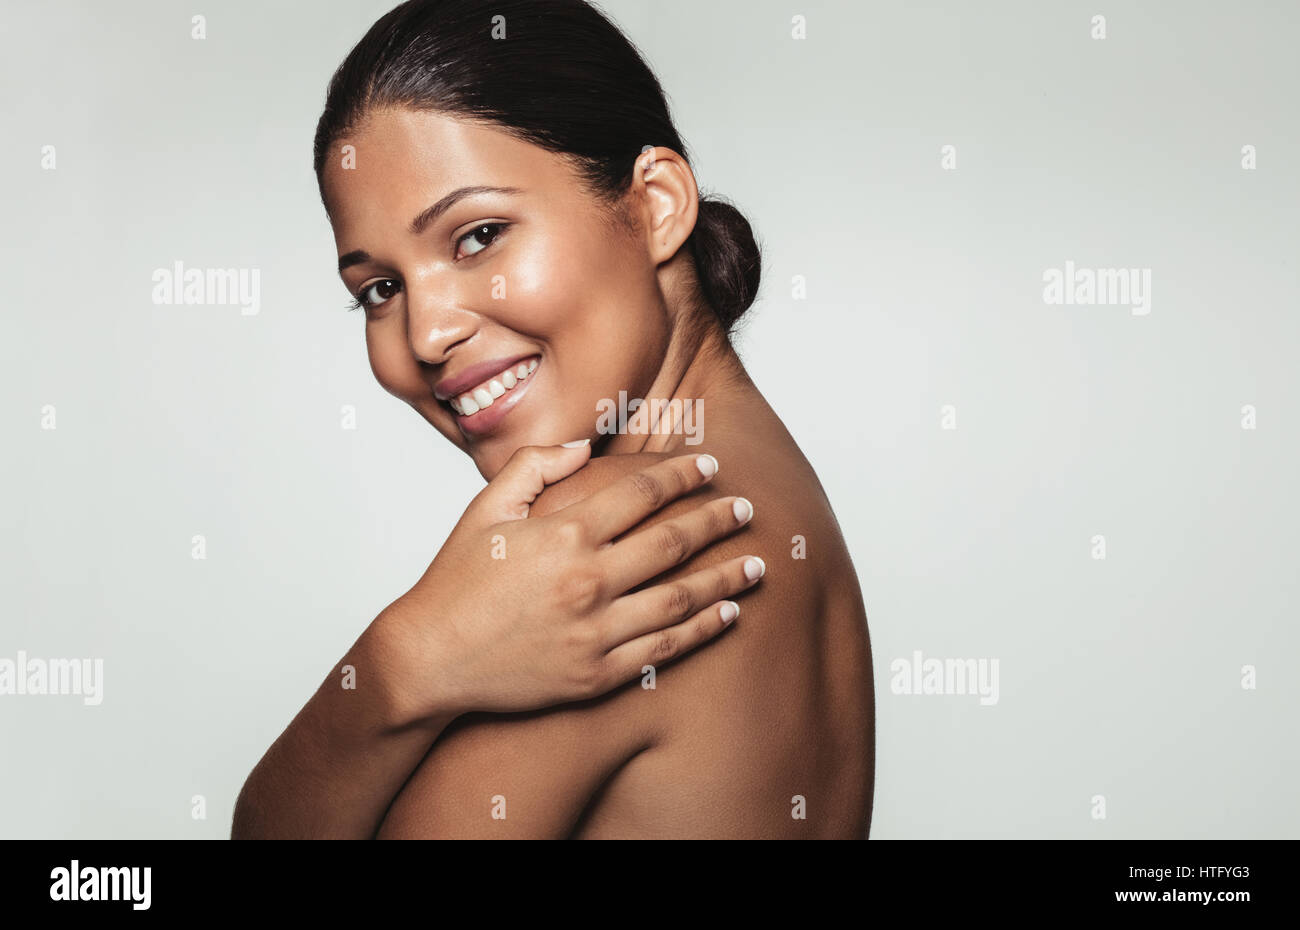 Portrait of pretty smiling woman covering her body with her hands and looking at camera against grey background. Close up of female model with beautif Stock Photo